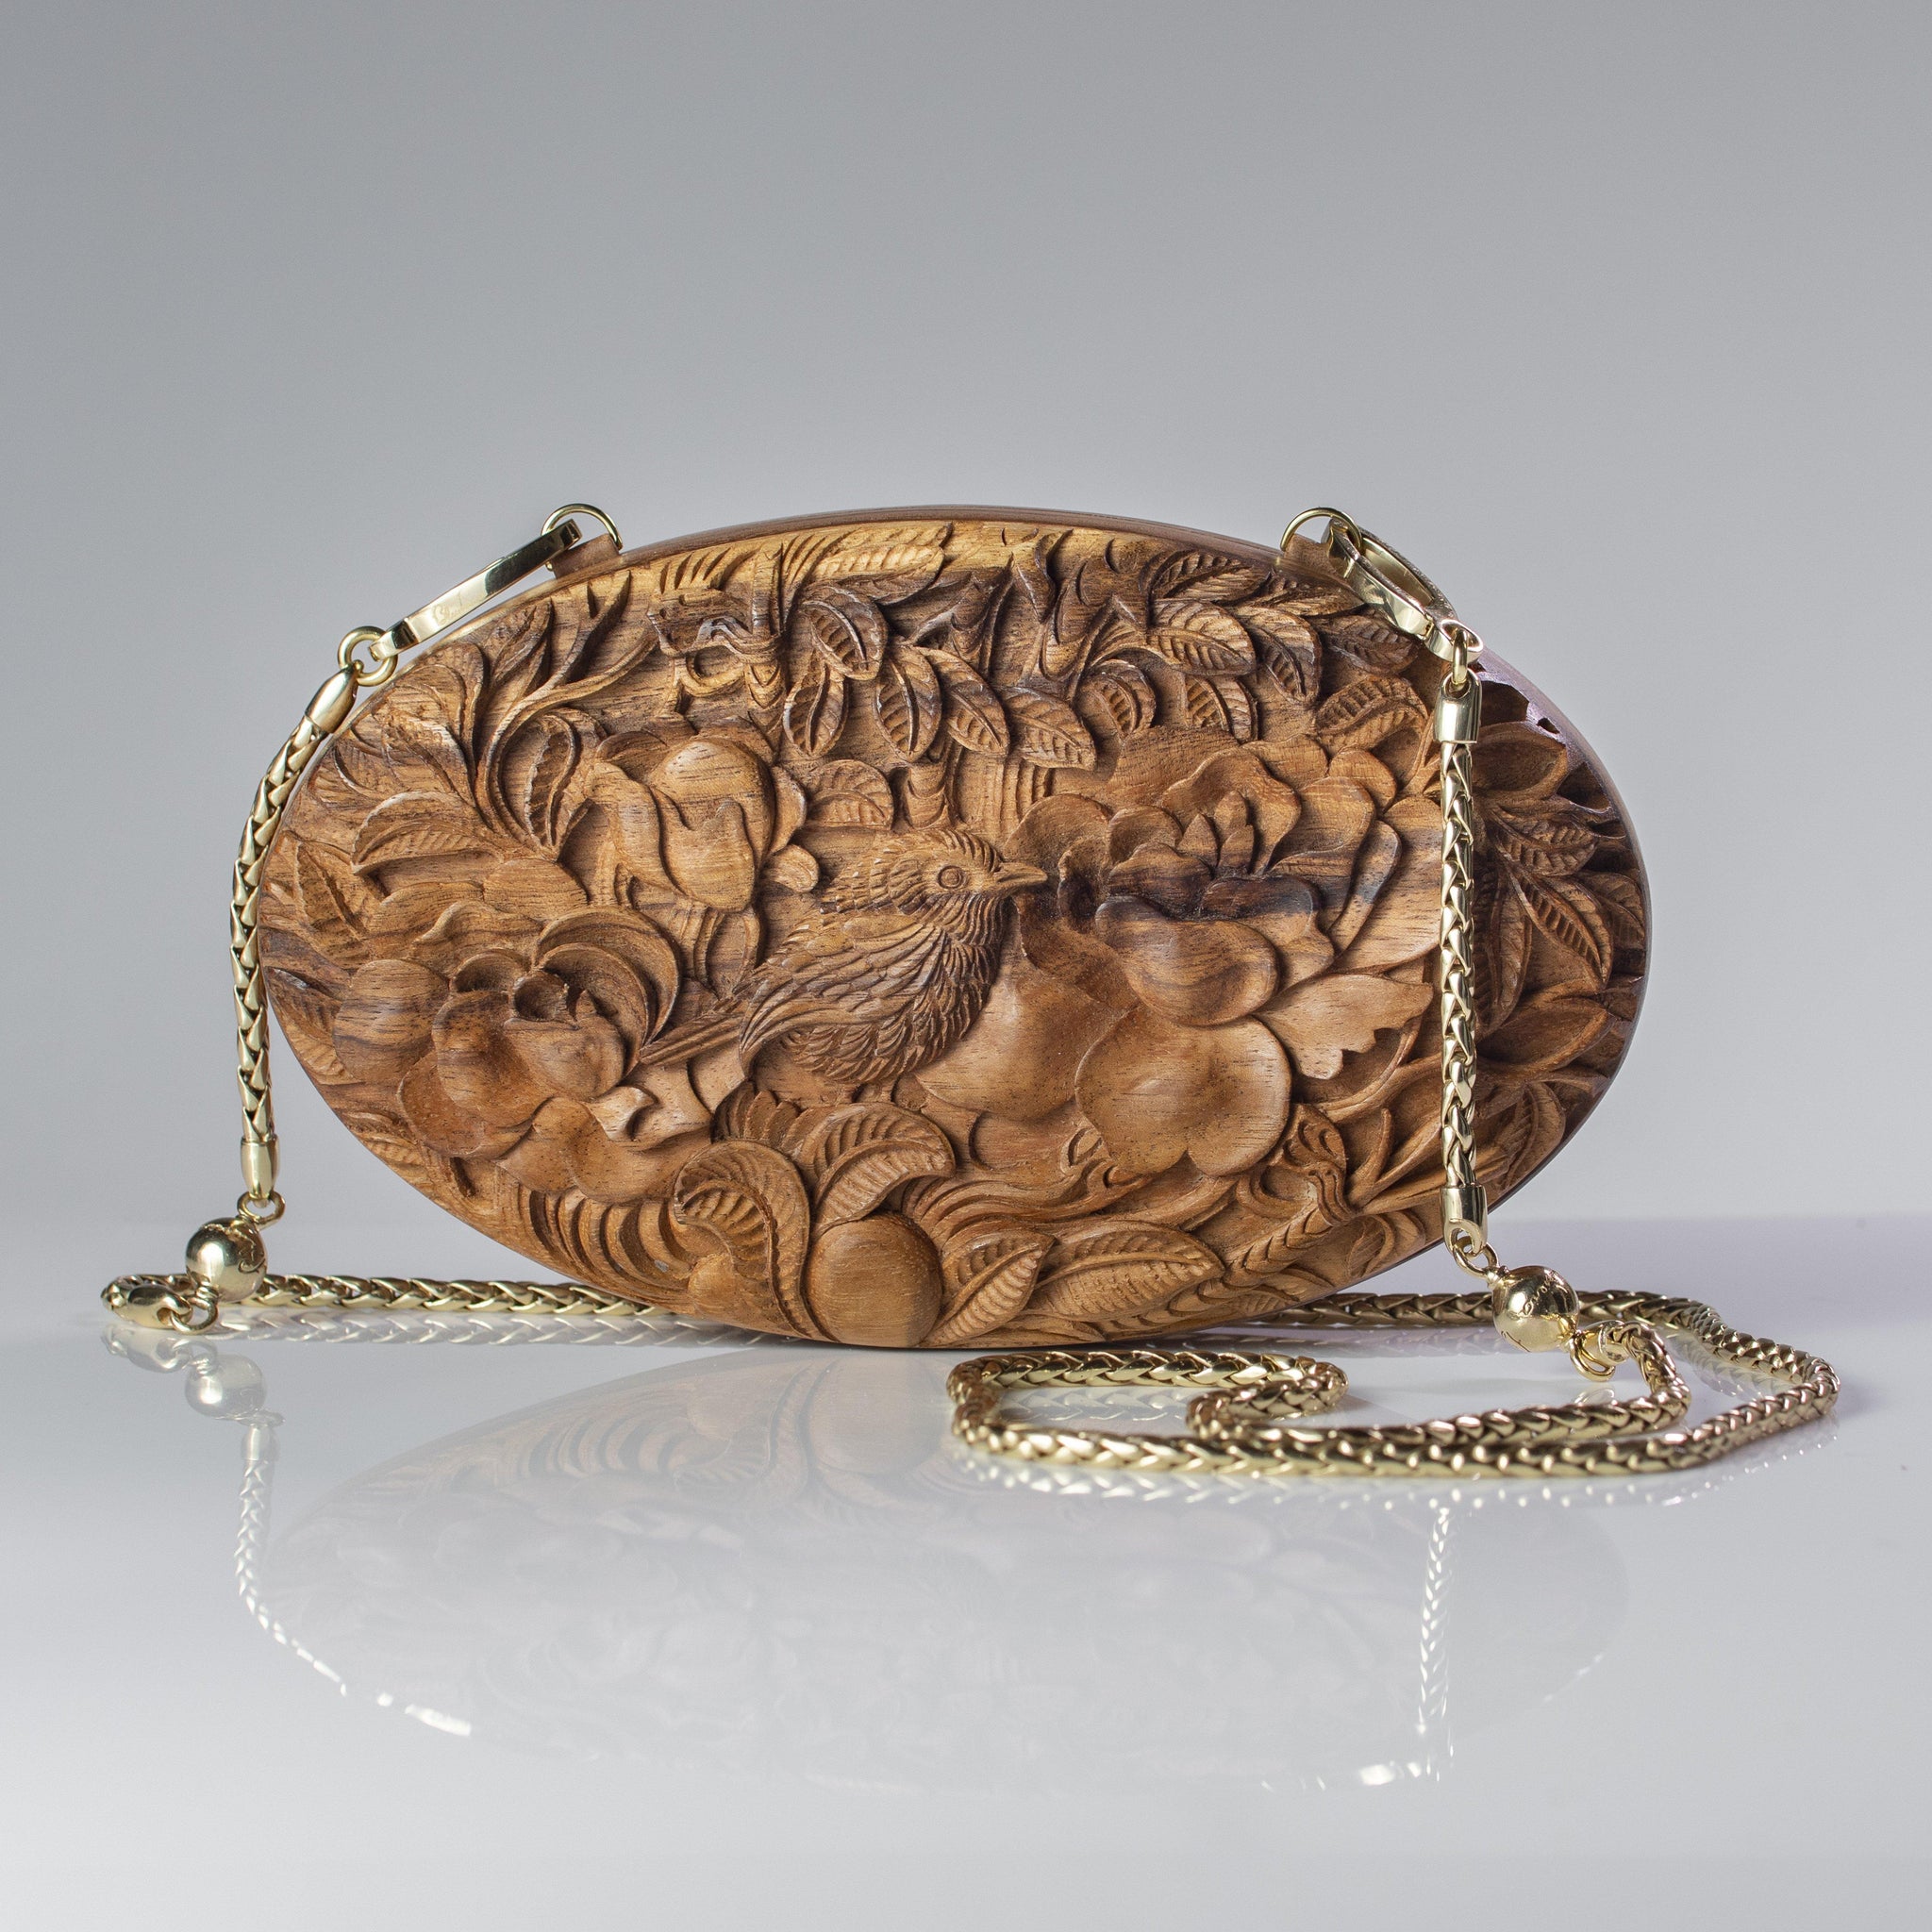 Roses and Nightingale Oval Clutch - Blumera